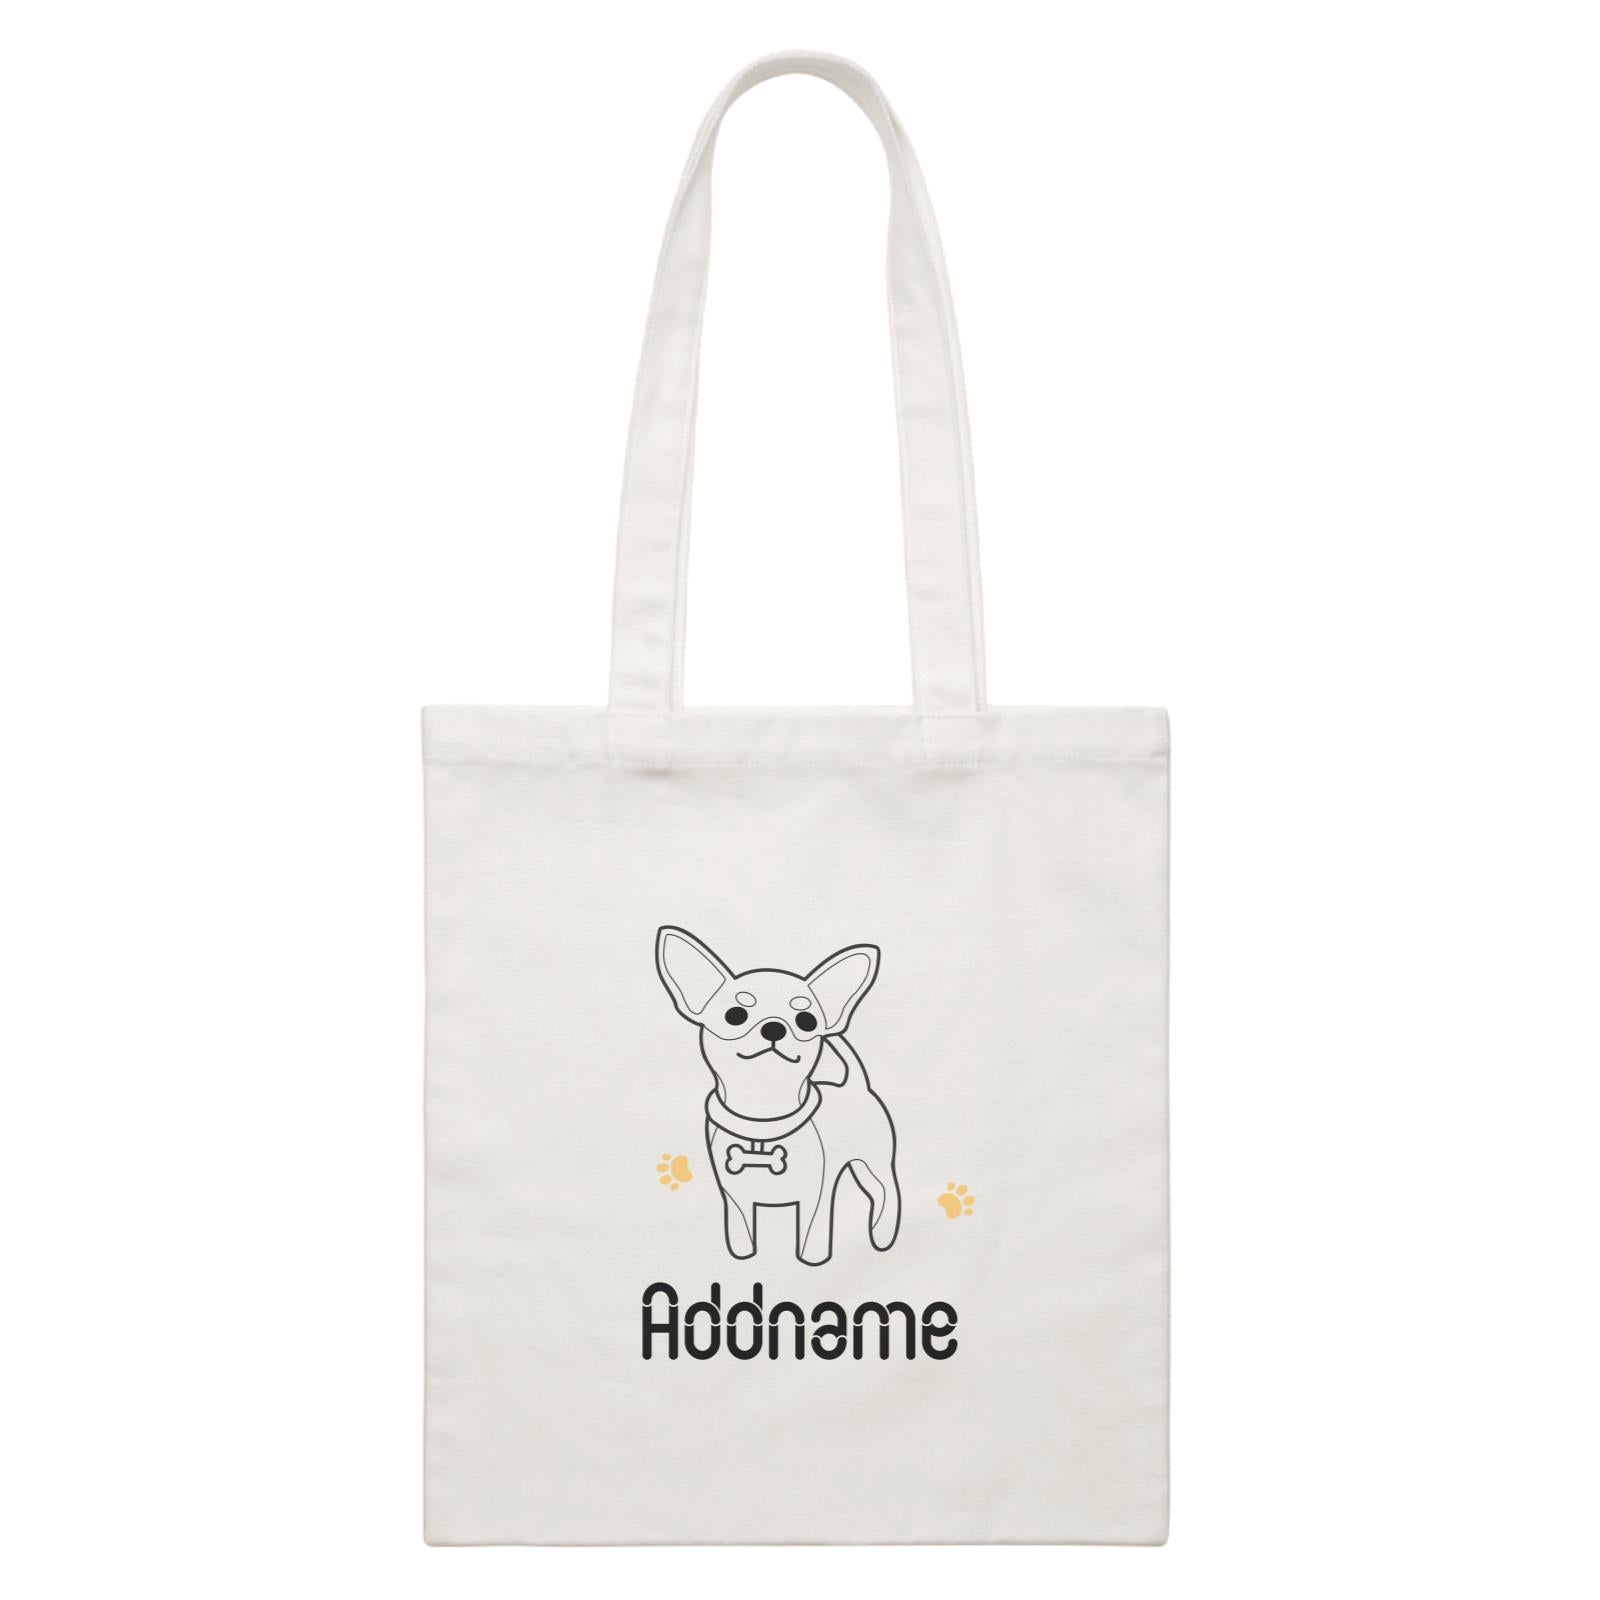 Coloring Outline Cute Hand Drawn Animals Dogs Chihuahua Addname White White Canvas Bag